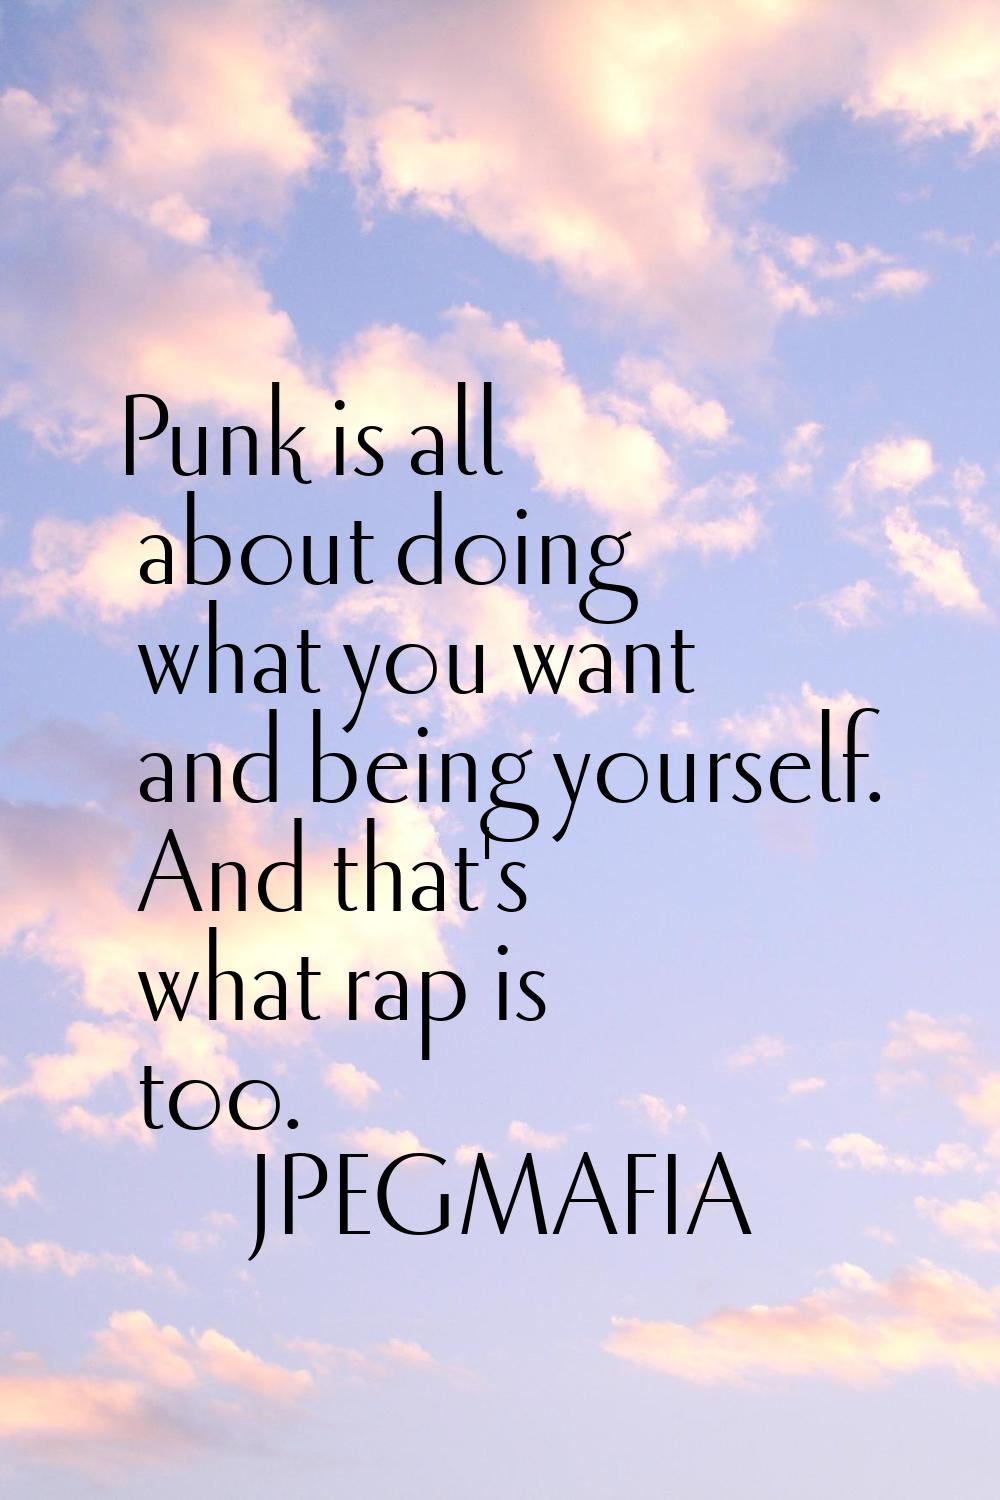 Punk is all about doing what you want and being yourself. And that's what rap is too.